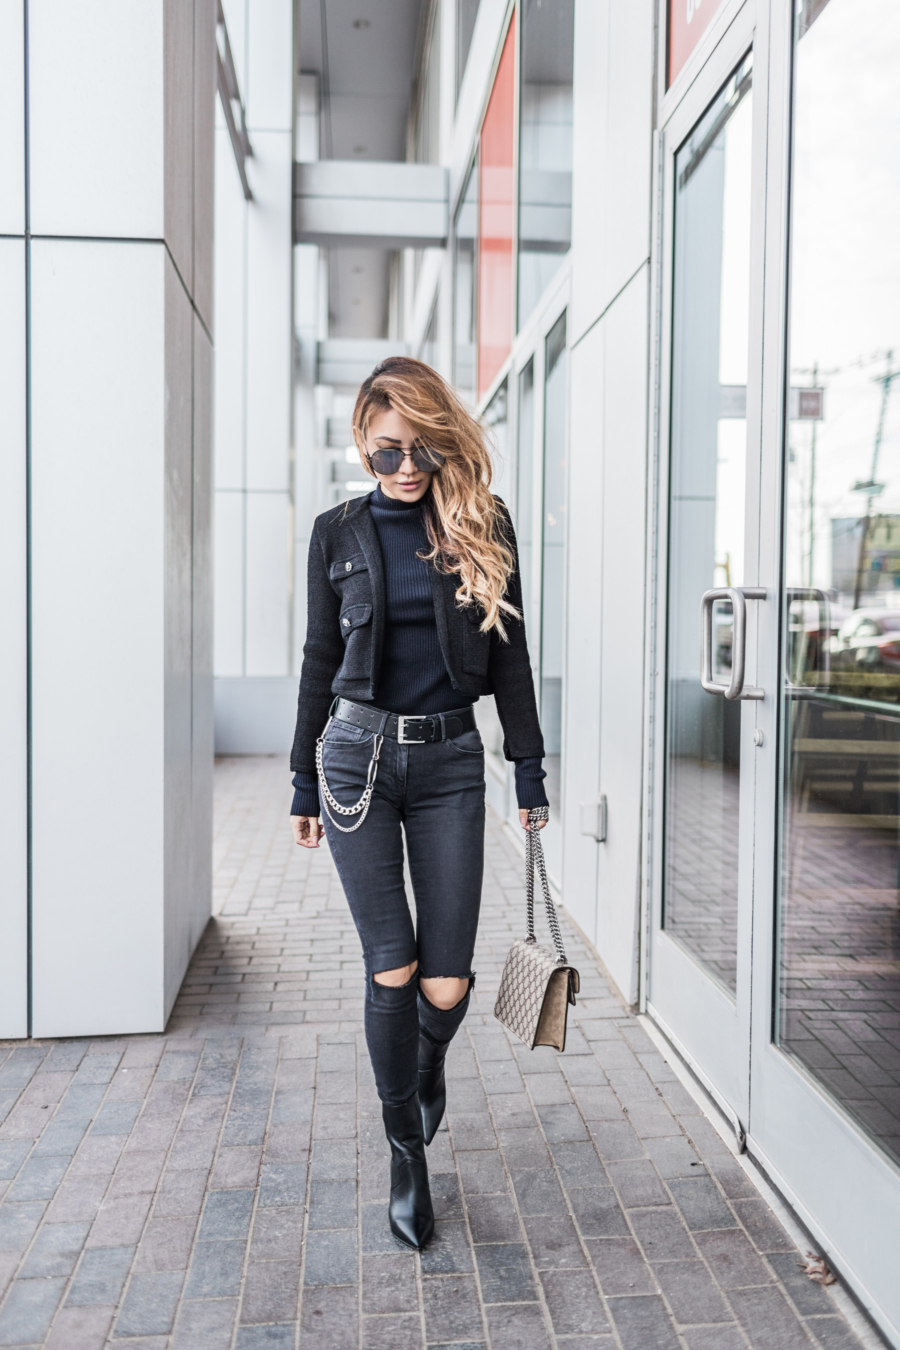 Nailing the all black outfit // notjessfashion.com